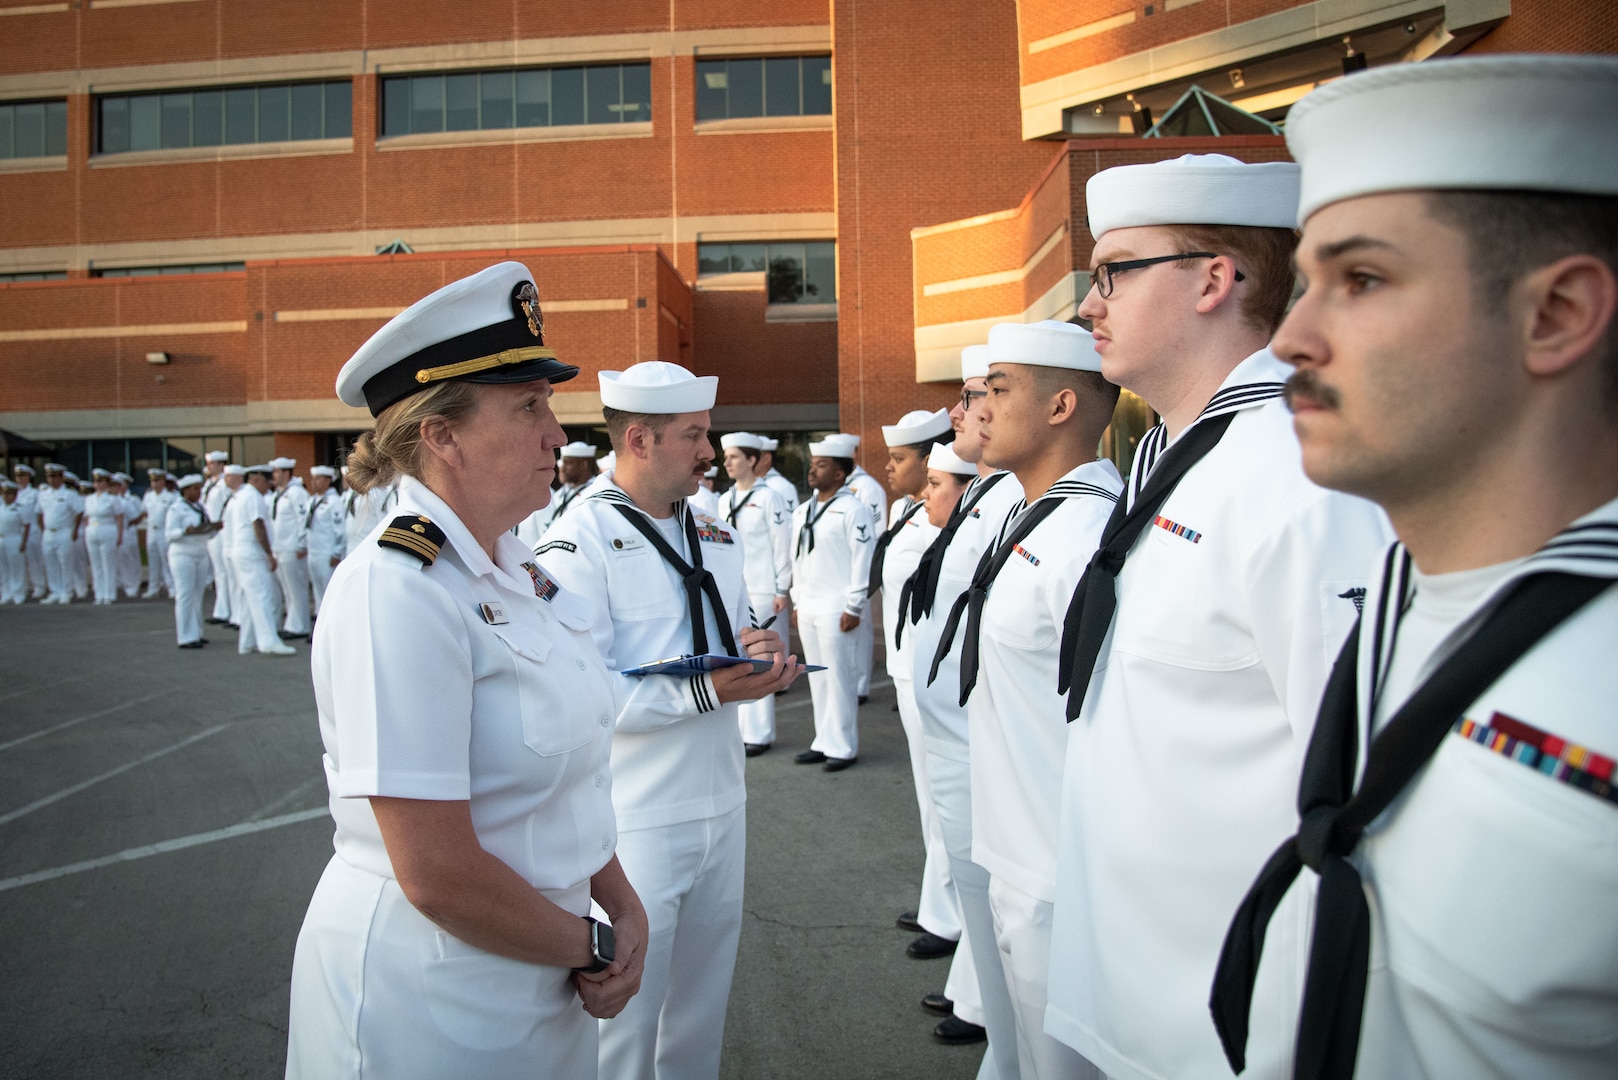 Lt. Cmdr. Amy Zaycek, left, and Hospital Corpsman First Class Garett Fralix, center, inspect the Summer Dress White uniforms of Sailors assigned to Naval Health Clinic Cherry Point during an inspection conducted Thursday, April 20.  

The inspection provided an opportunity for Sailors to participate in a Navy tradition, demonstrate attention to detail and celebrate the coming summer season.